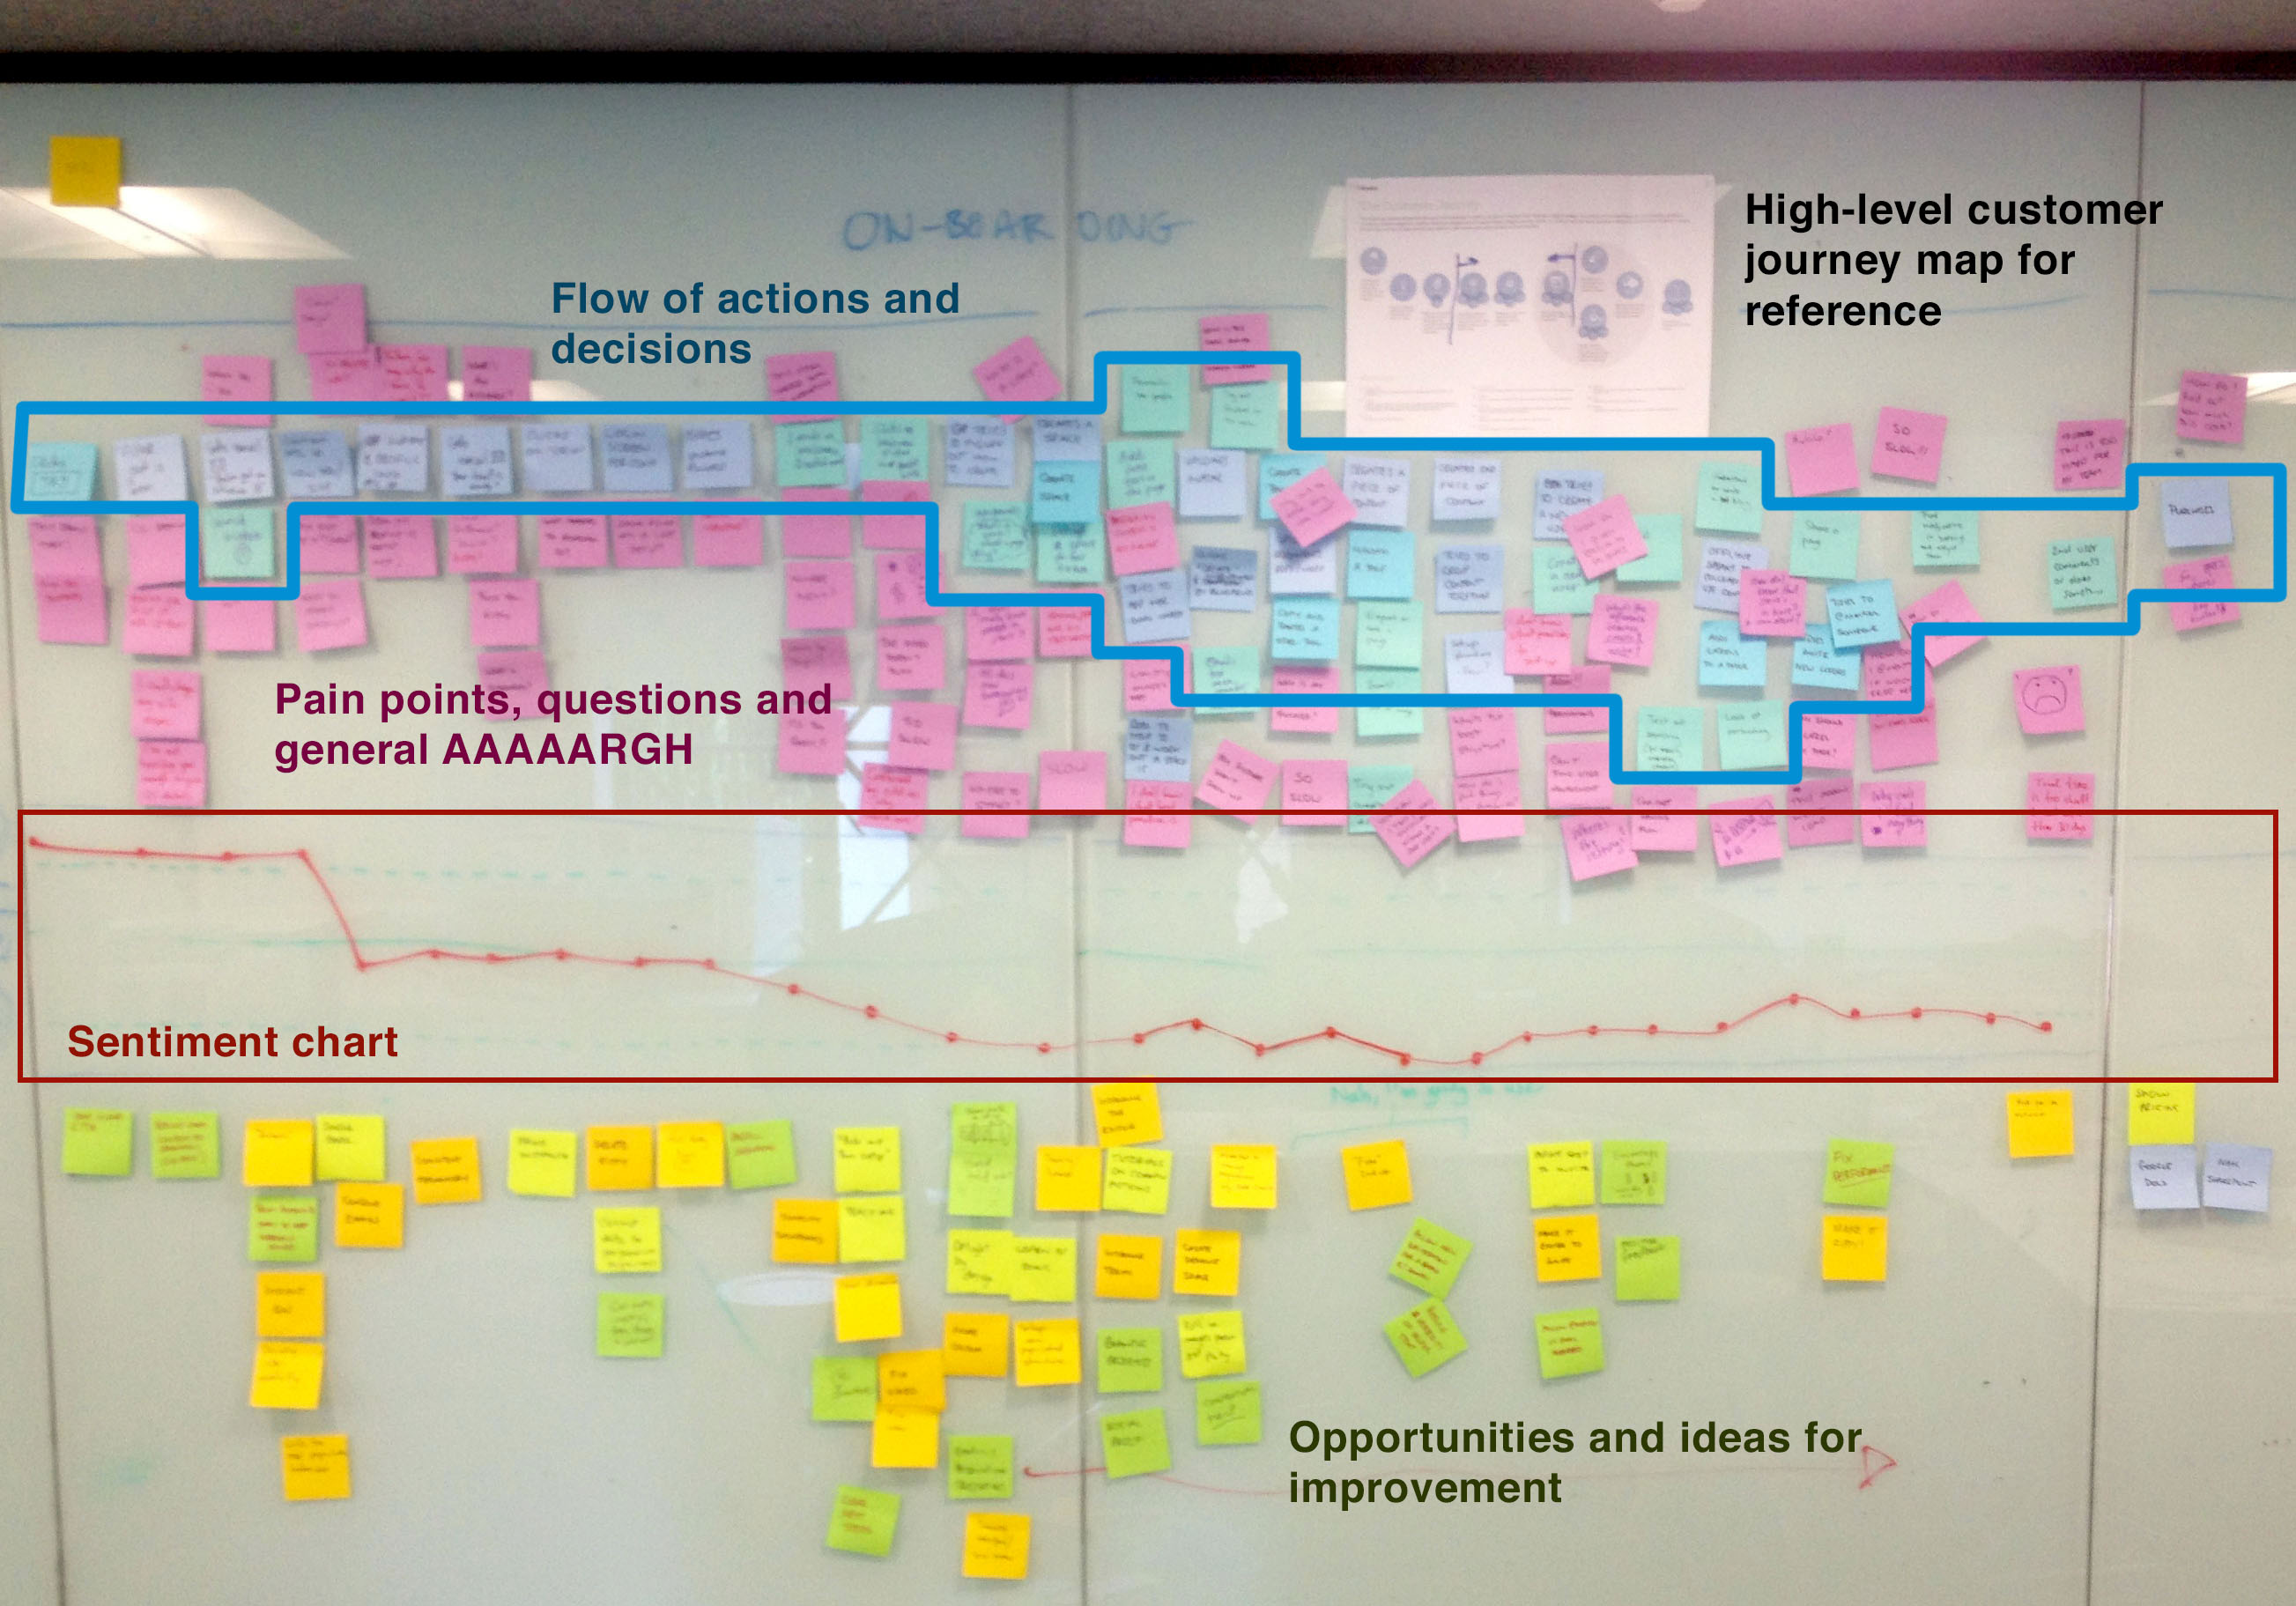 An example user journey map.